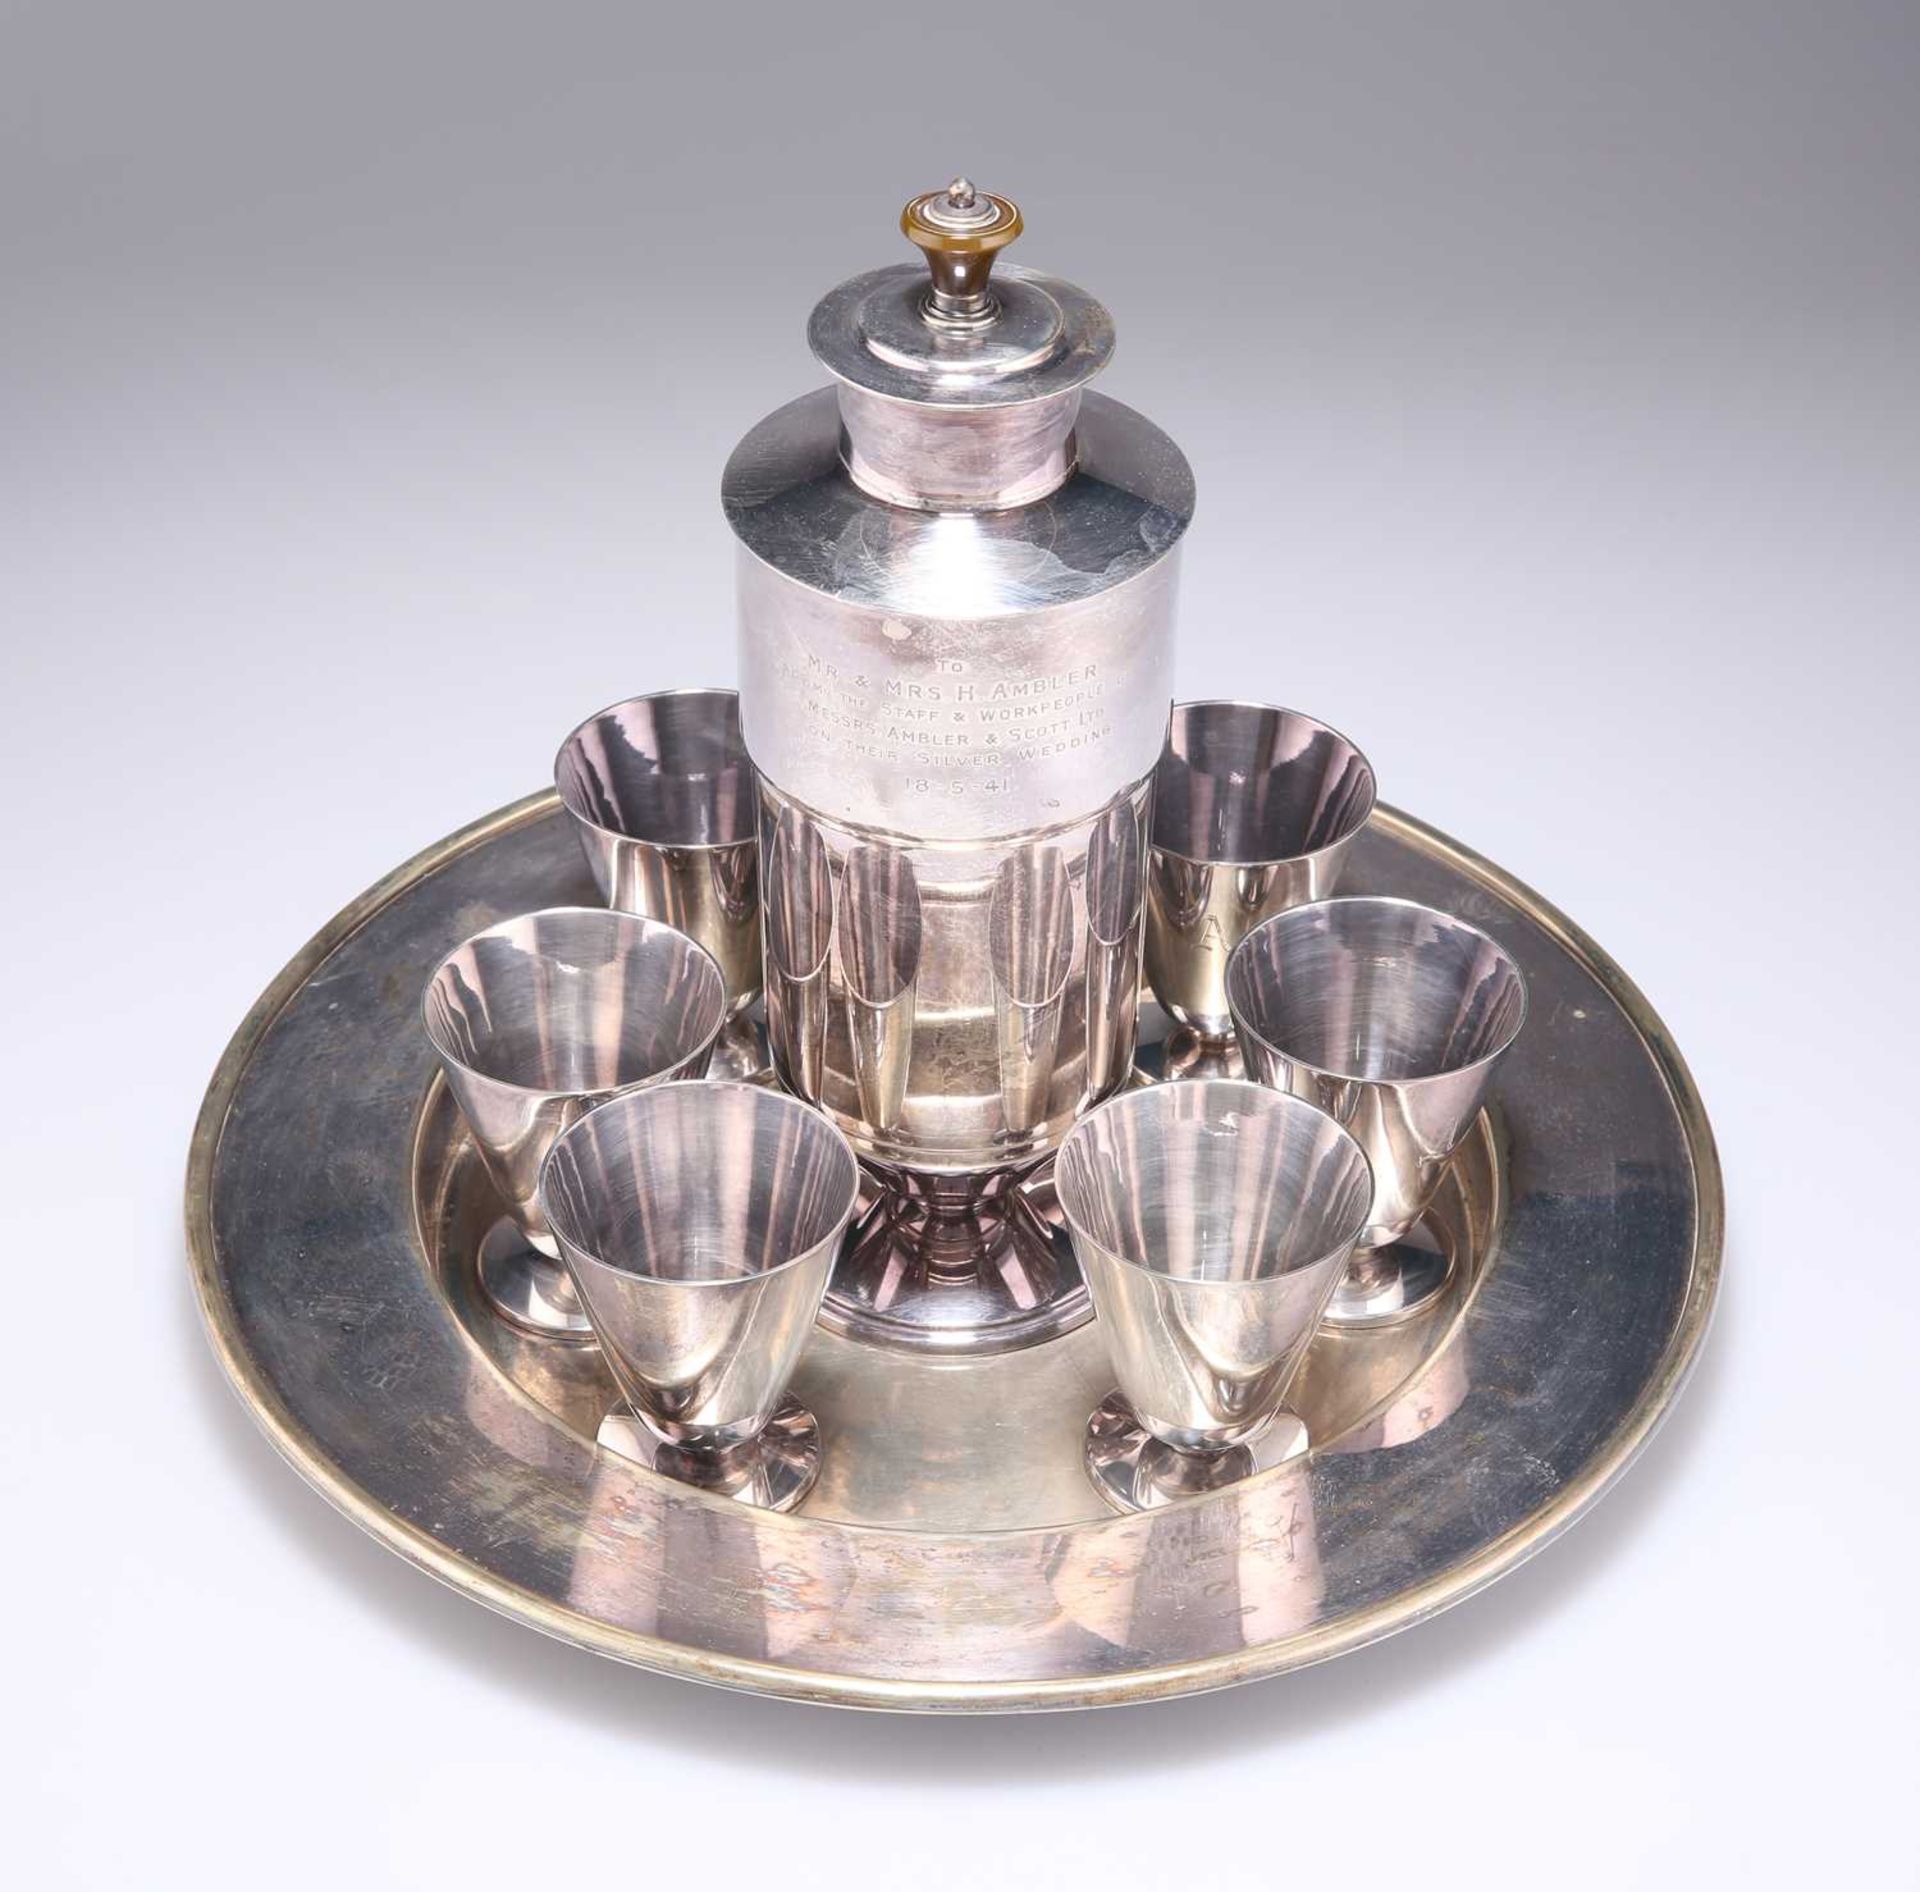 A SILVER-PLATED COCKTAIL SET, EARLY 20TH CENTURY